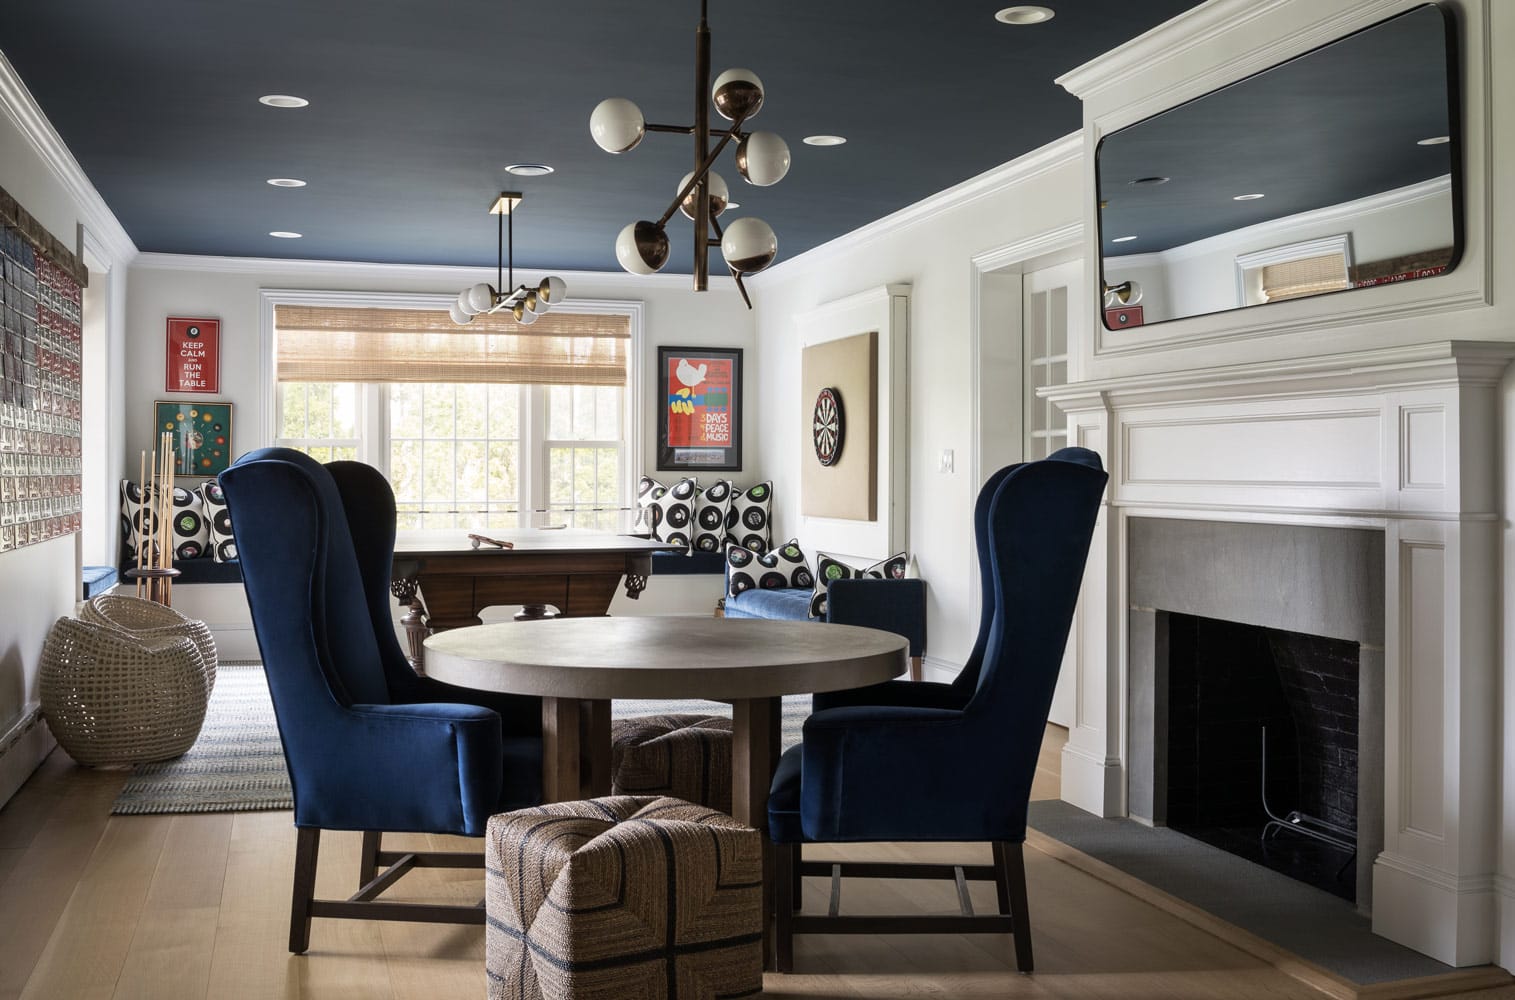 Game room interior design by Annette Jaffe Interiors in a family home on Long Island